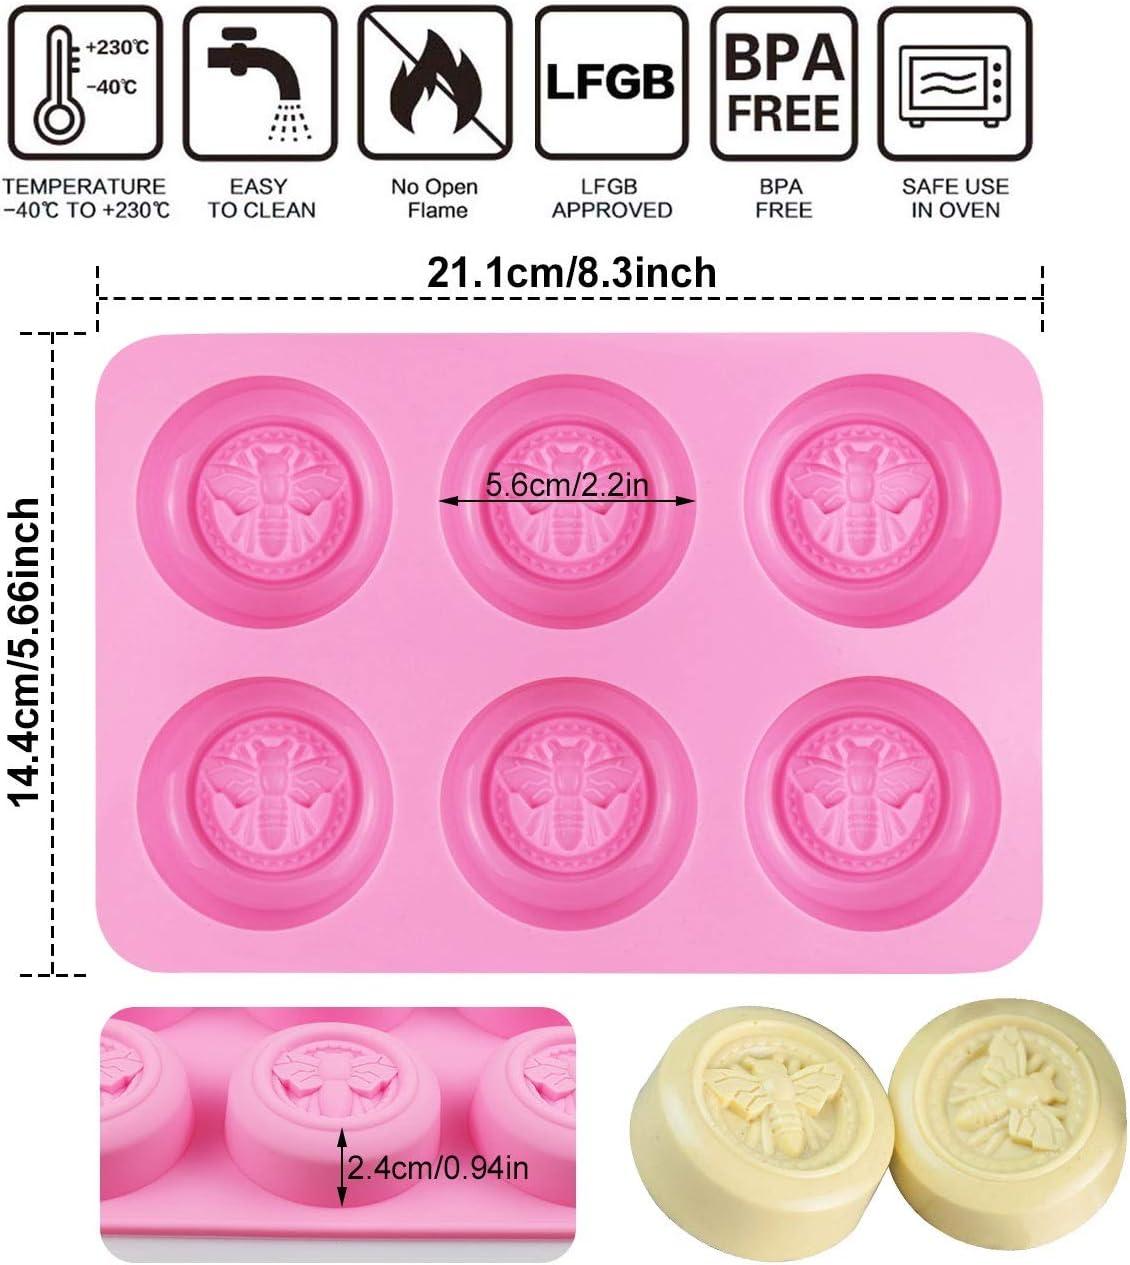 Bee Silicone Molds - Round Honeybee Silicone Molds for Homemade Soaps,  Lotion Bar, Jello, Bath Bomb, Beeswax, Resin, Chocolate and Dessert (Pink)  Round Bee Molds